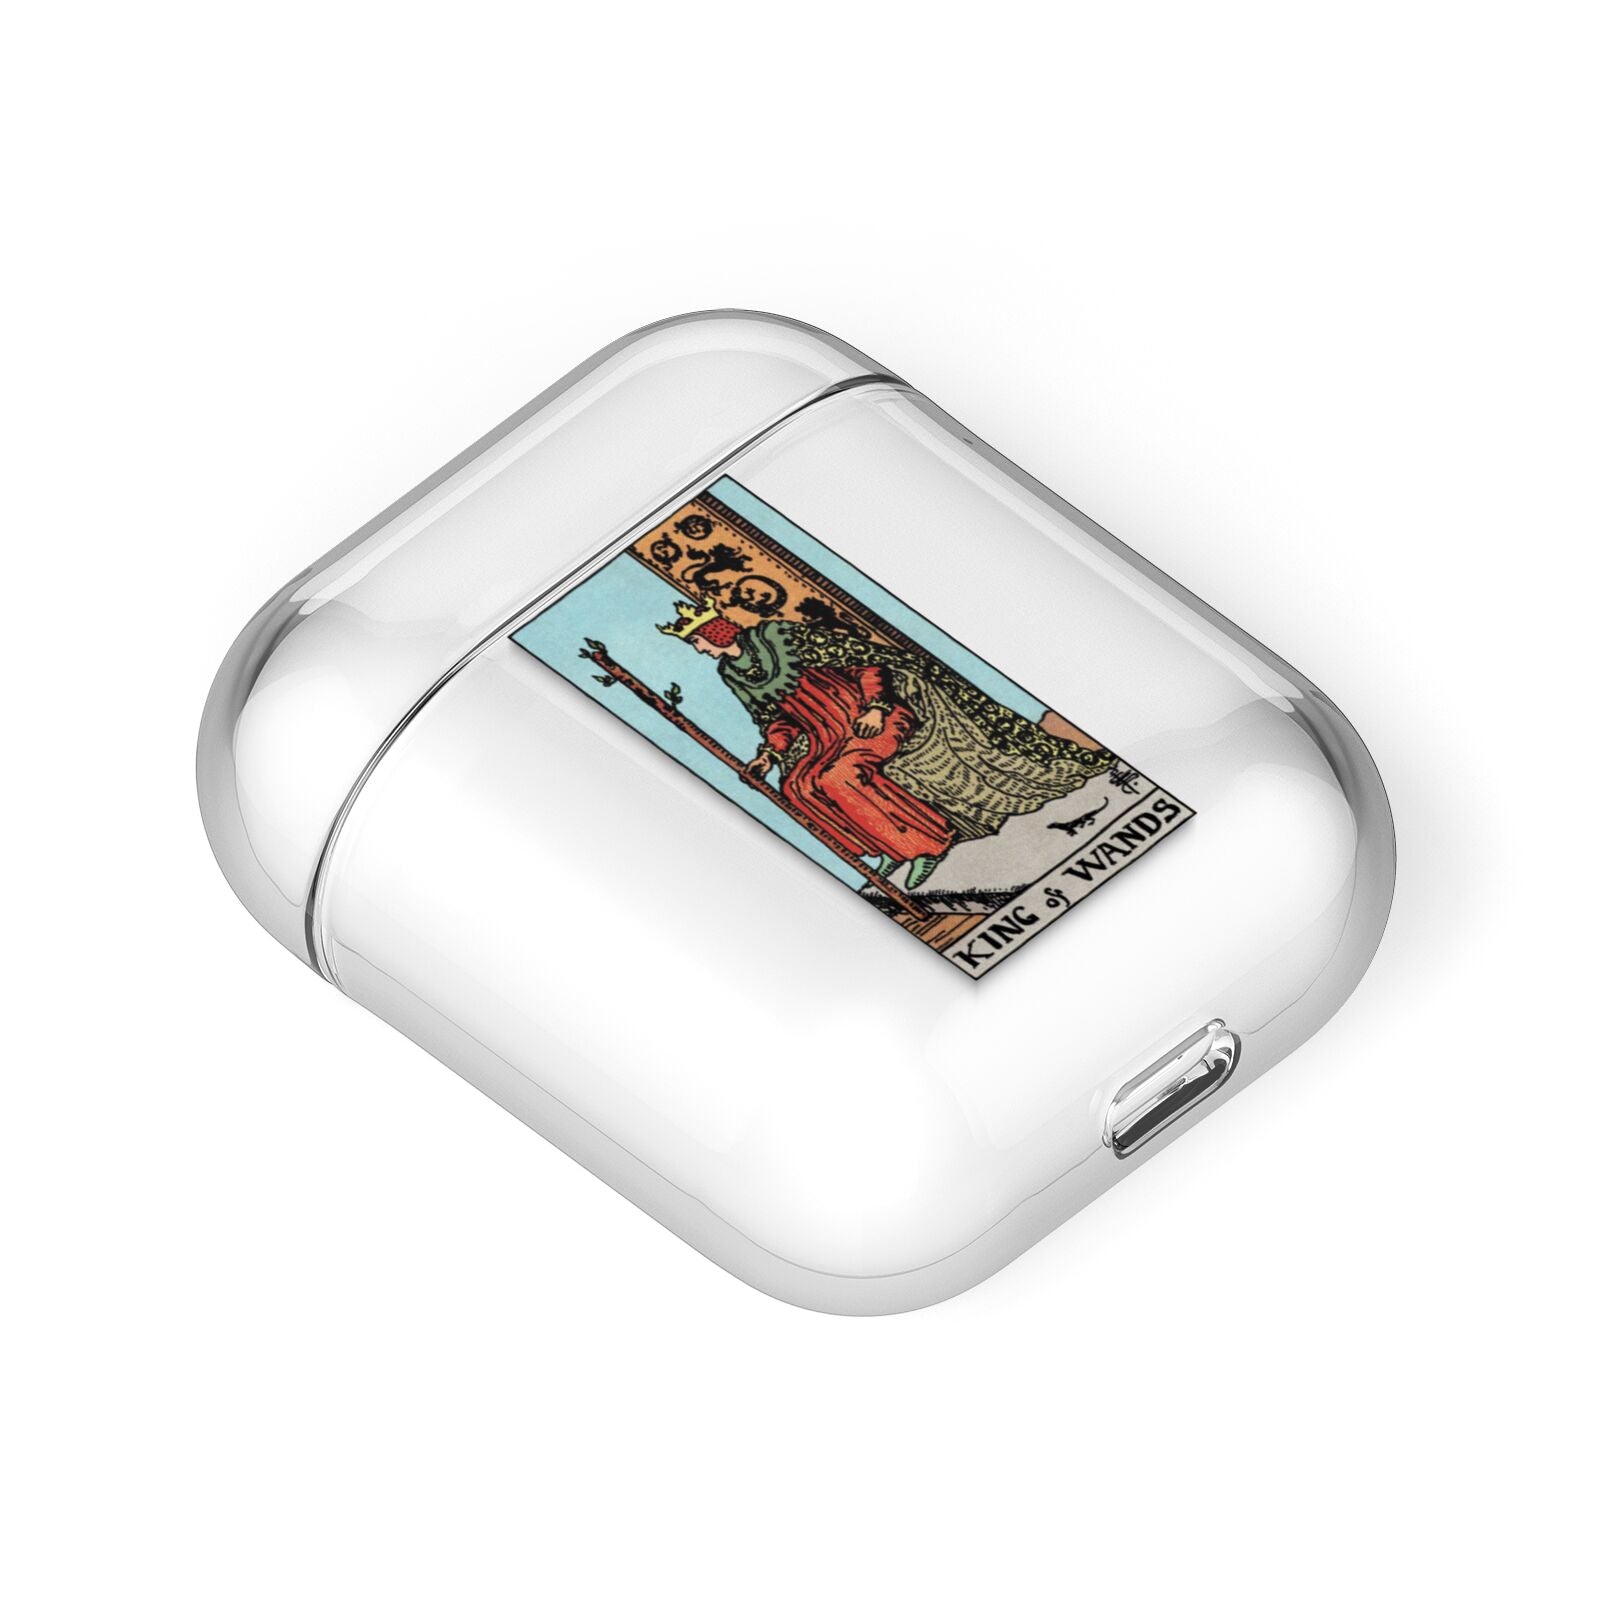 King of Wands Tarot Card AirPods Case Laid Flat